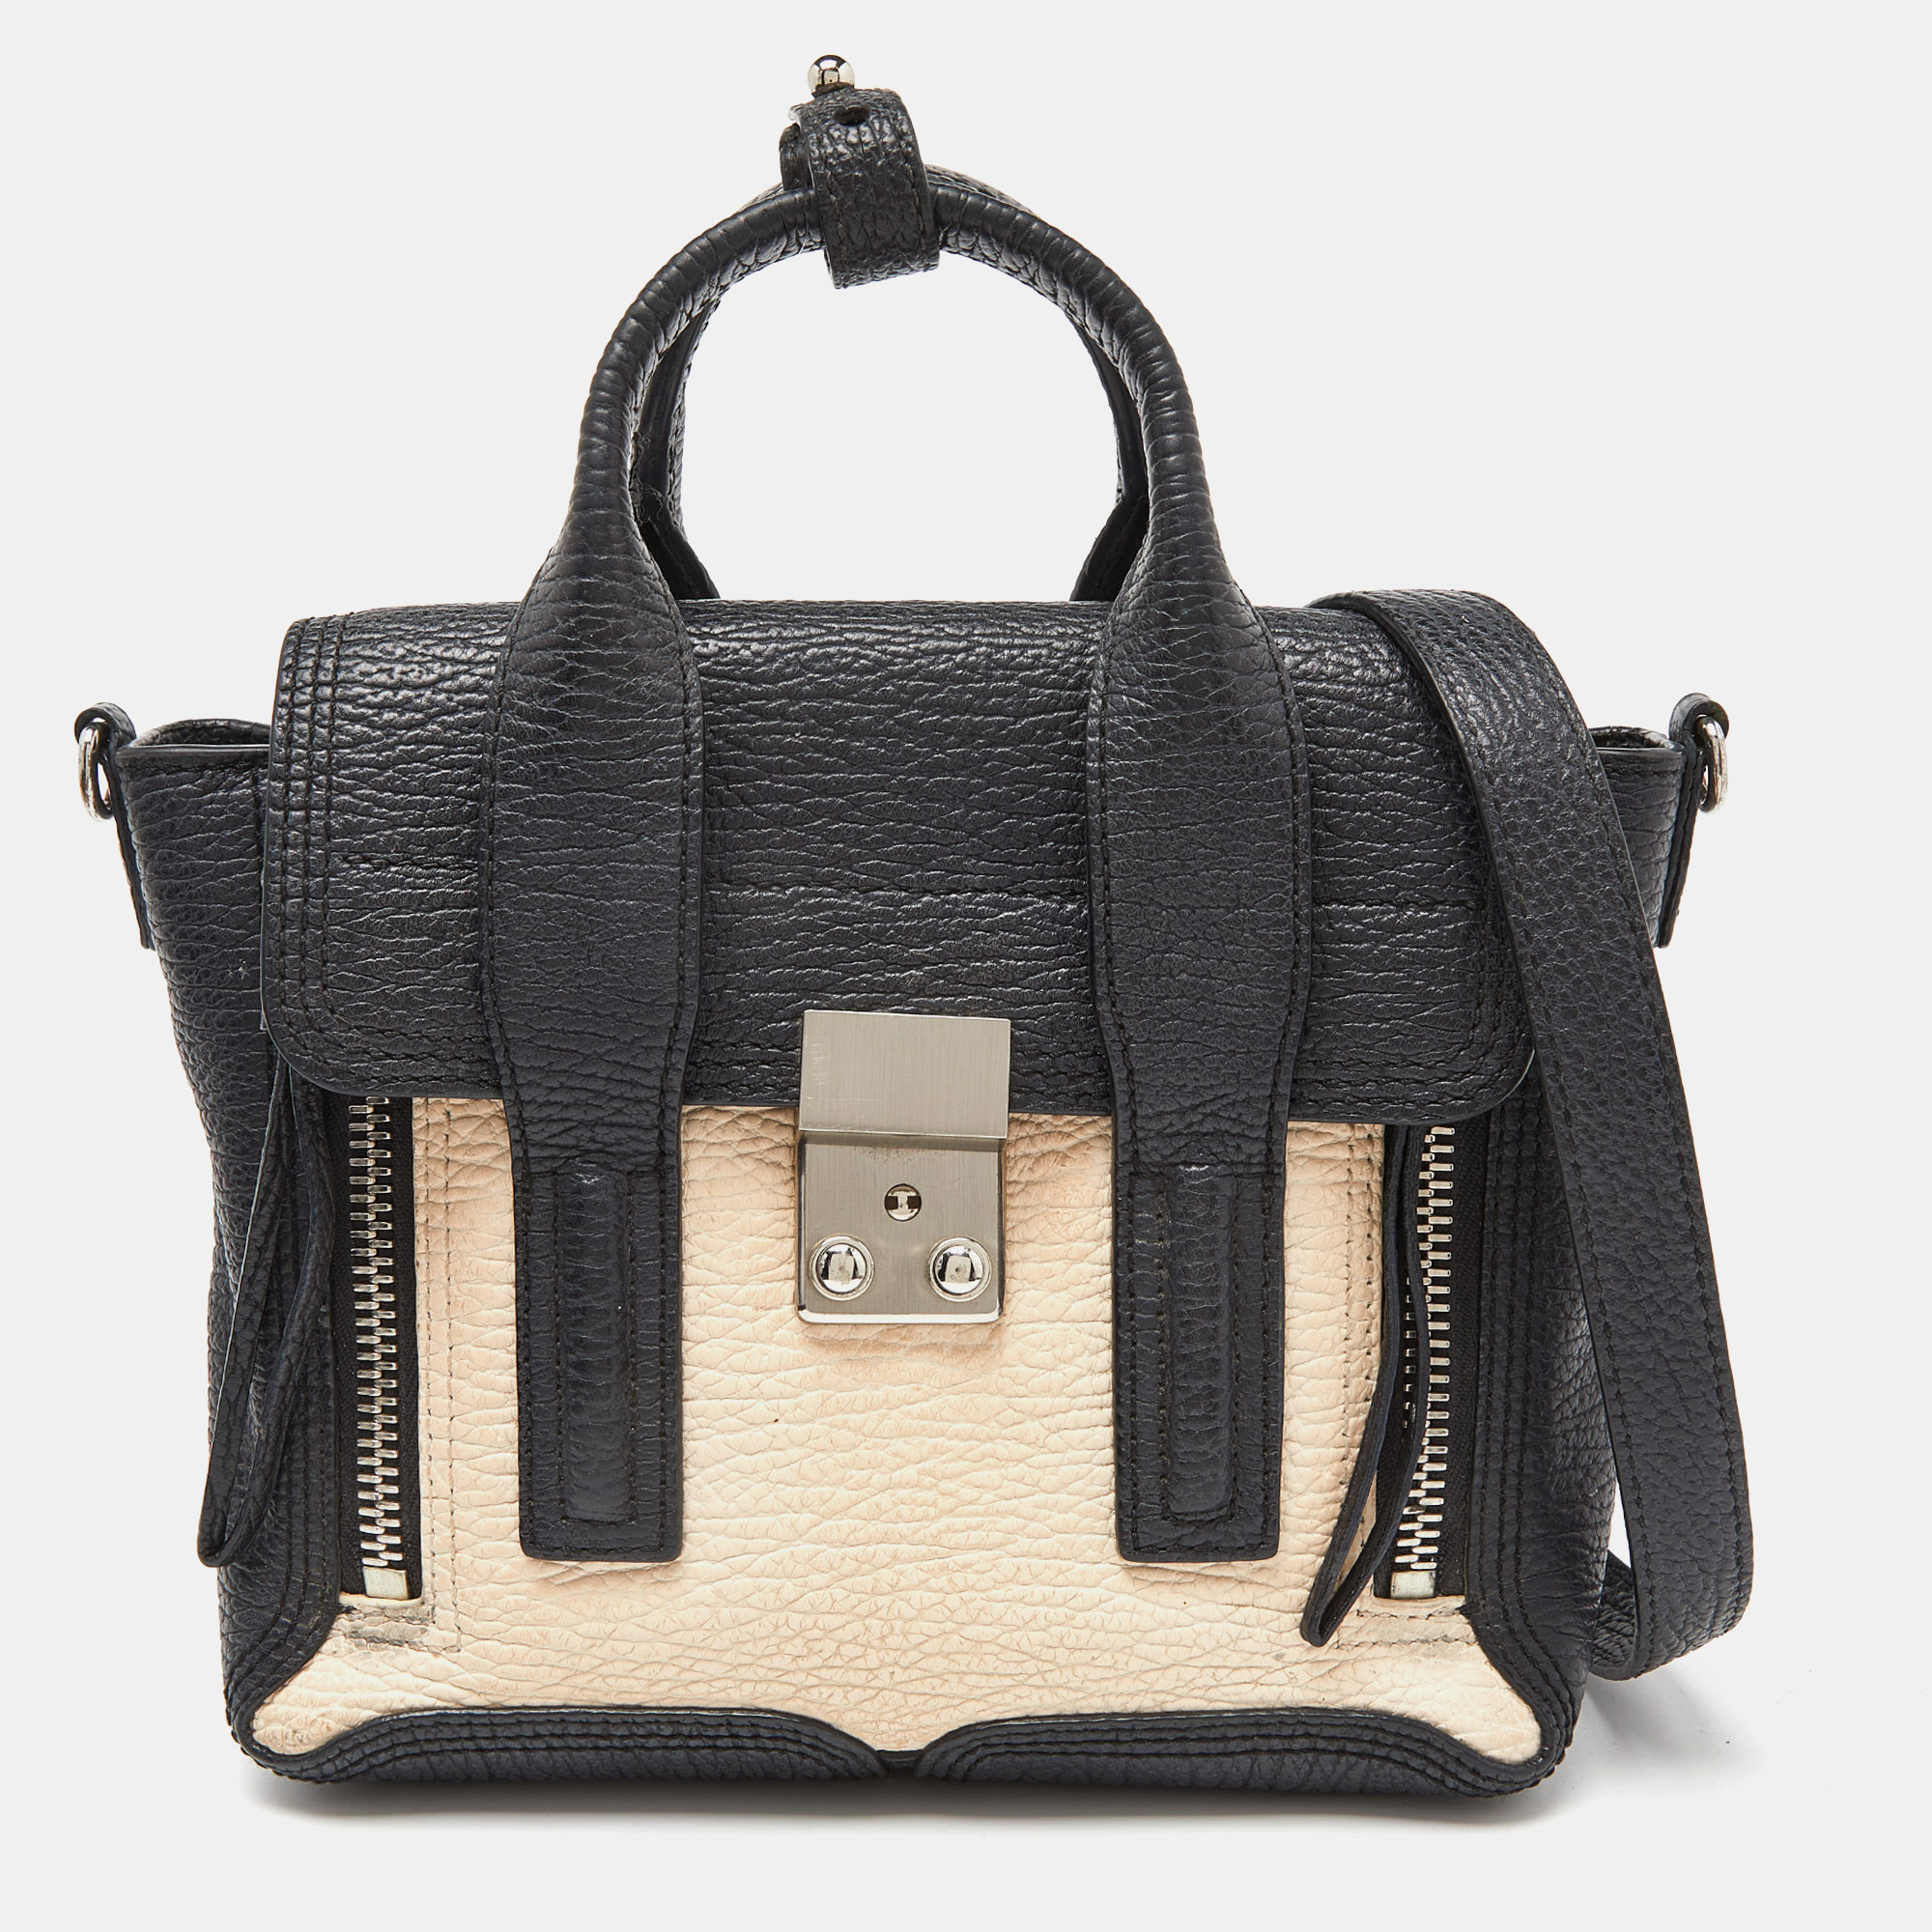 The structured shape and functional characteristics make this satchel by 3.1 Phillip Lim a thoughtful investment. Lined with fabric your valuables are secured with a lock closure on the front flap. The zipper pockets at the front and the dual carrying options make this bag a reliable accessory.